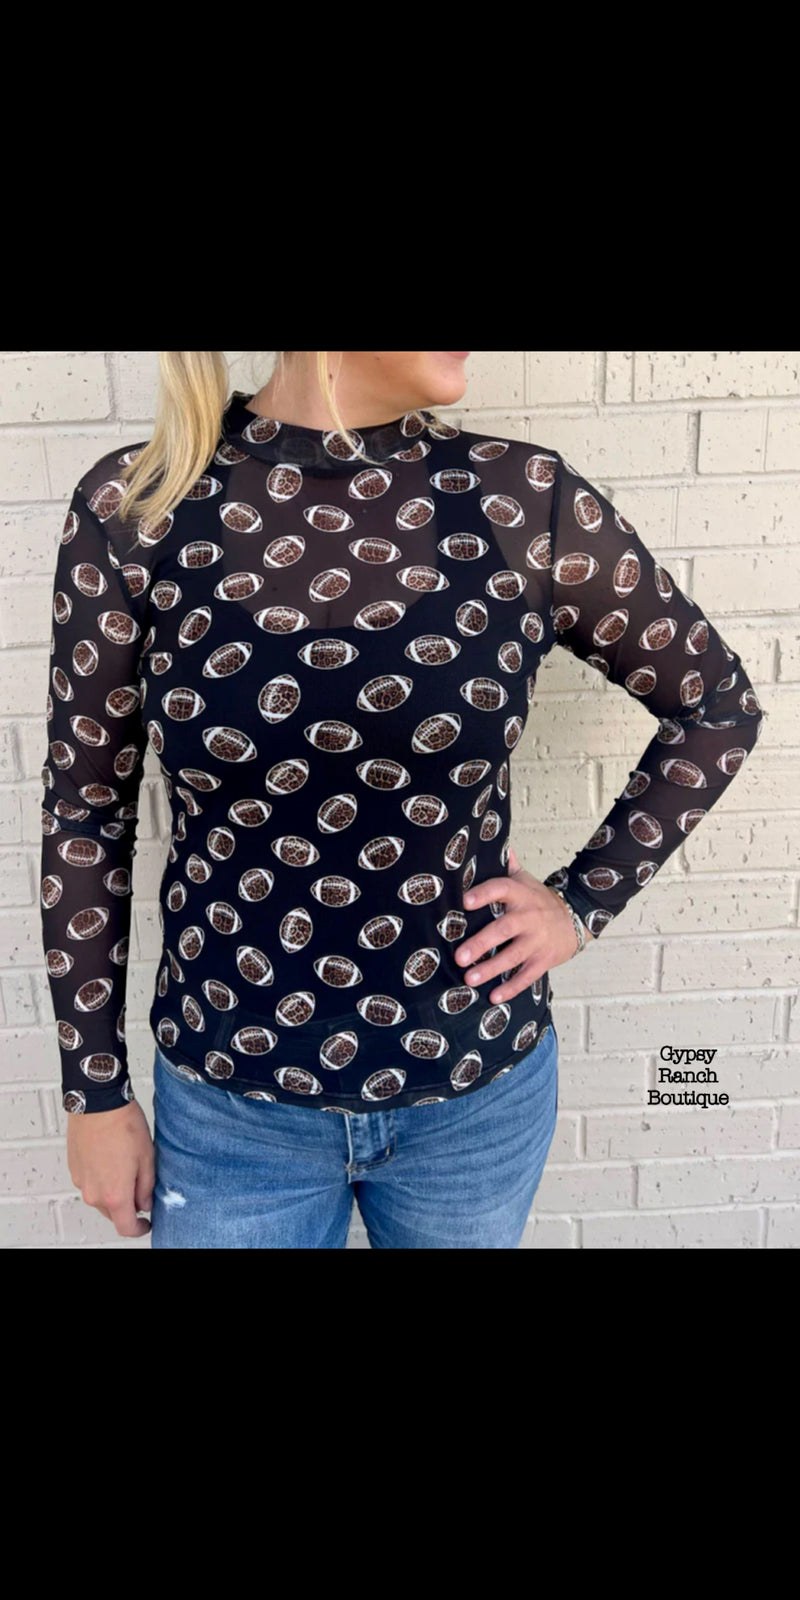 The Girls of Fall Leopard Football Mesh Layering Top - Also in Plus Size